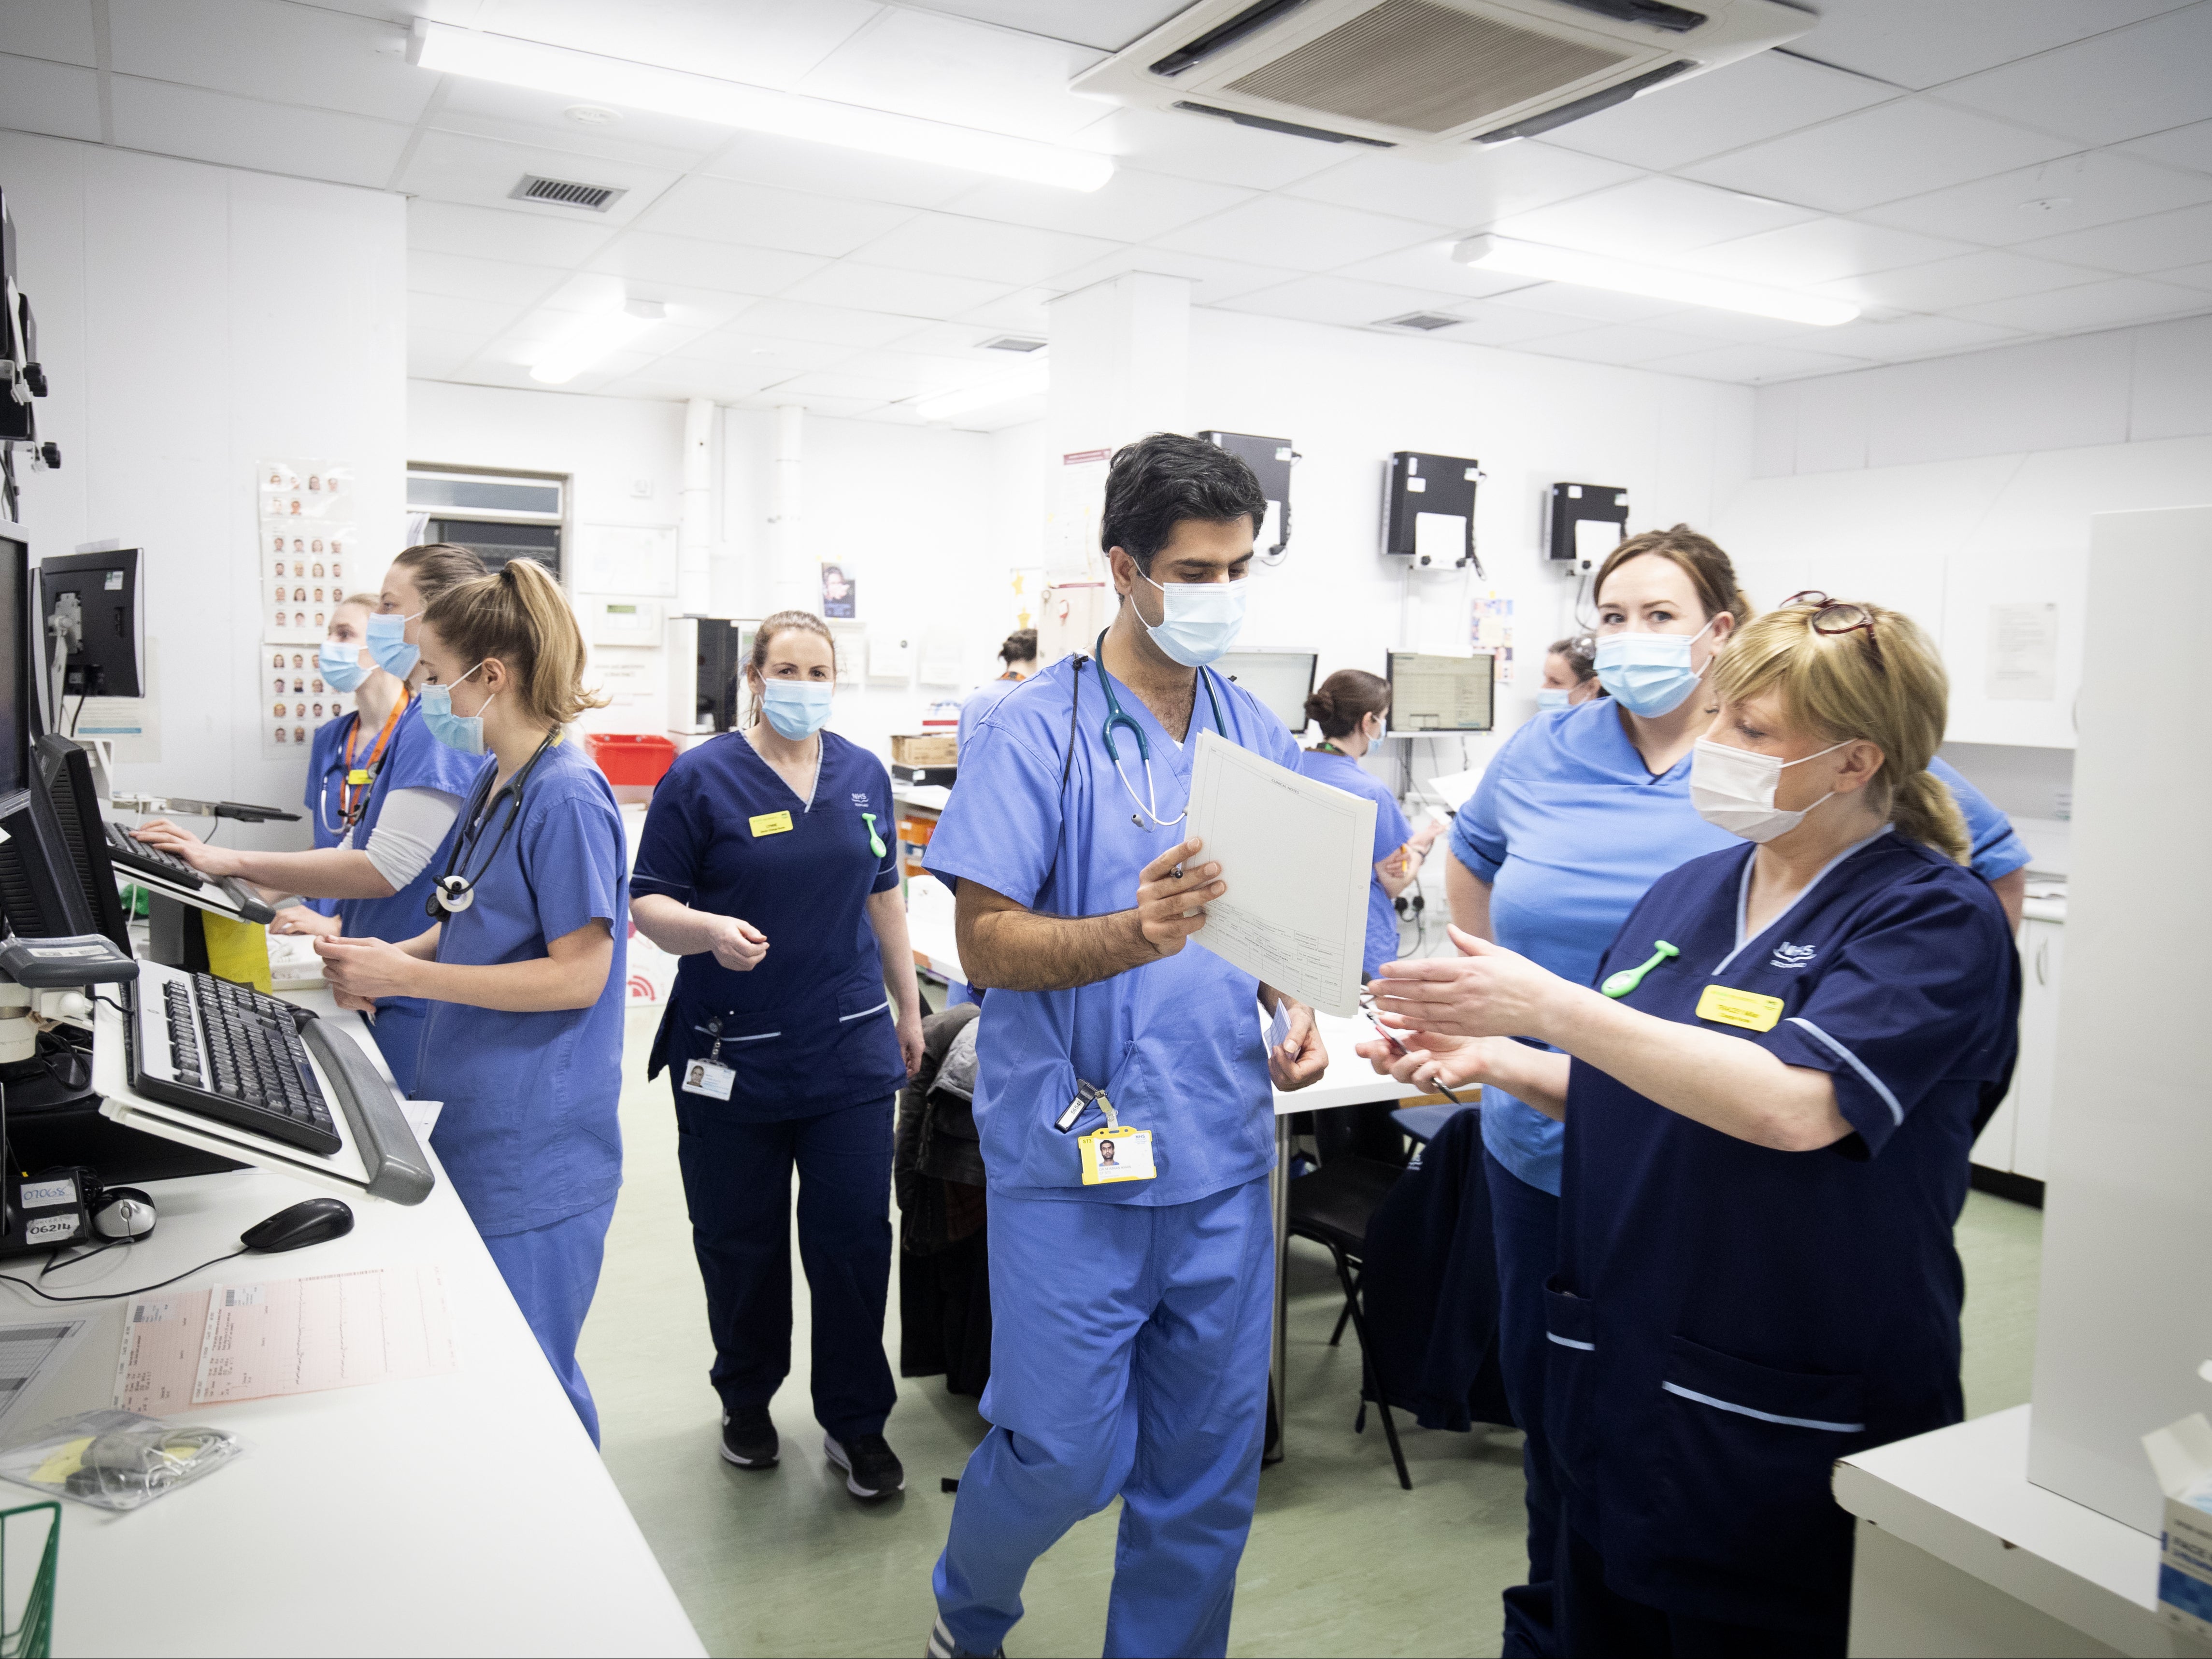 Thousands of junior doctors have fallen behind in their training because of the Covid pandemic